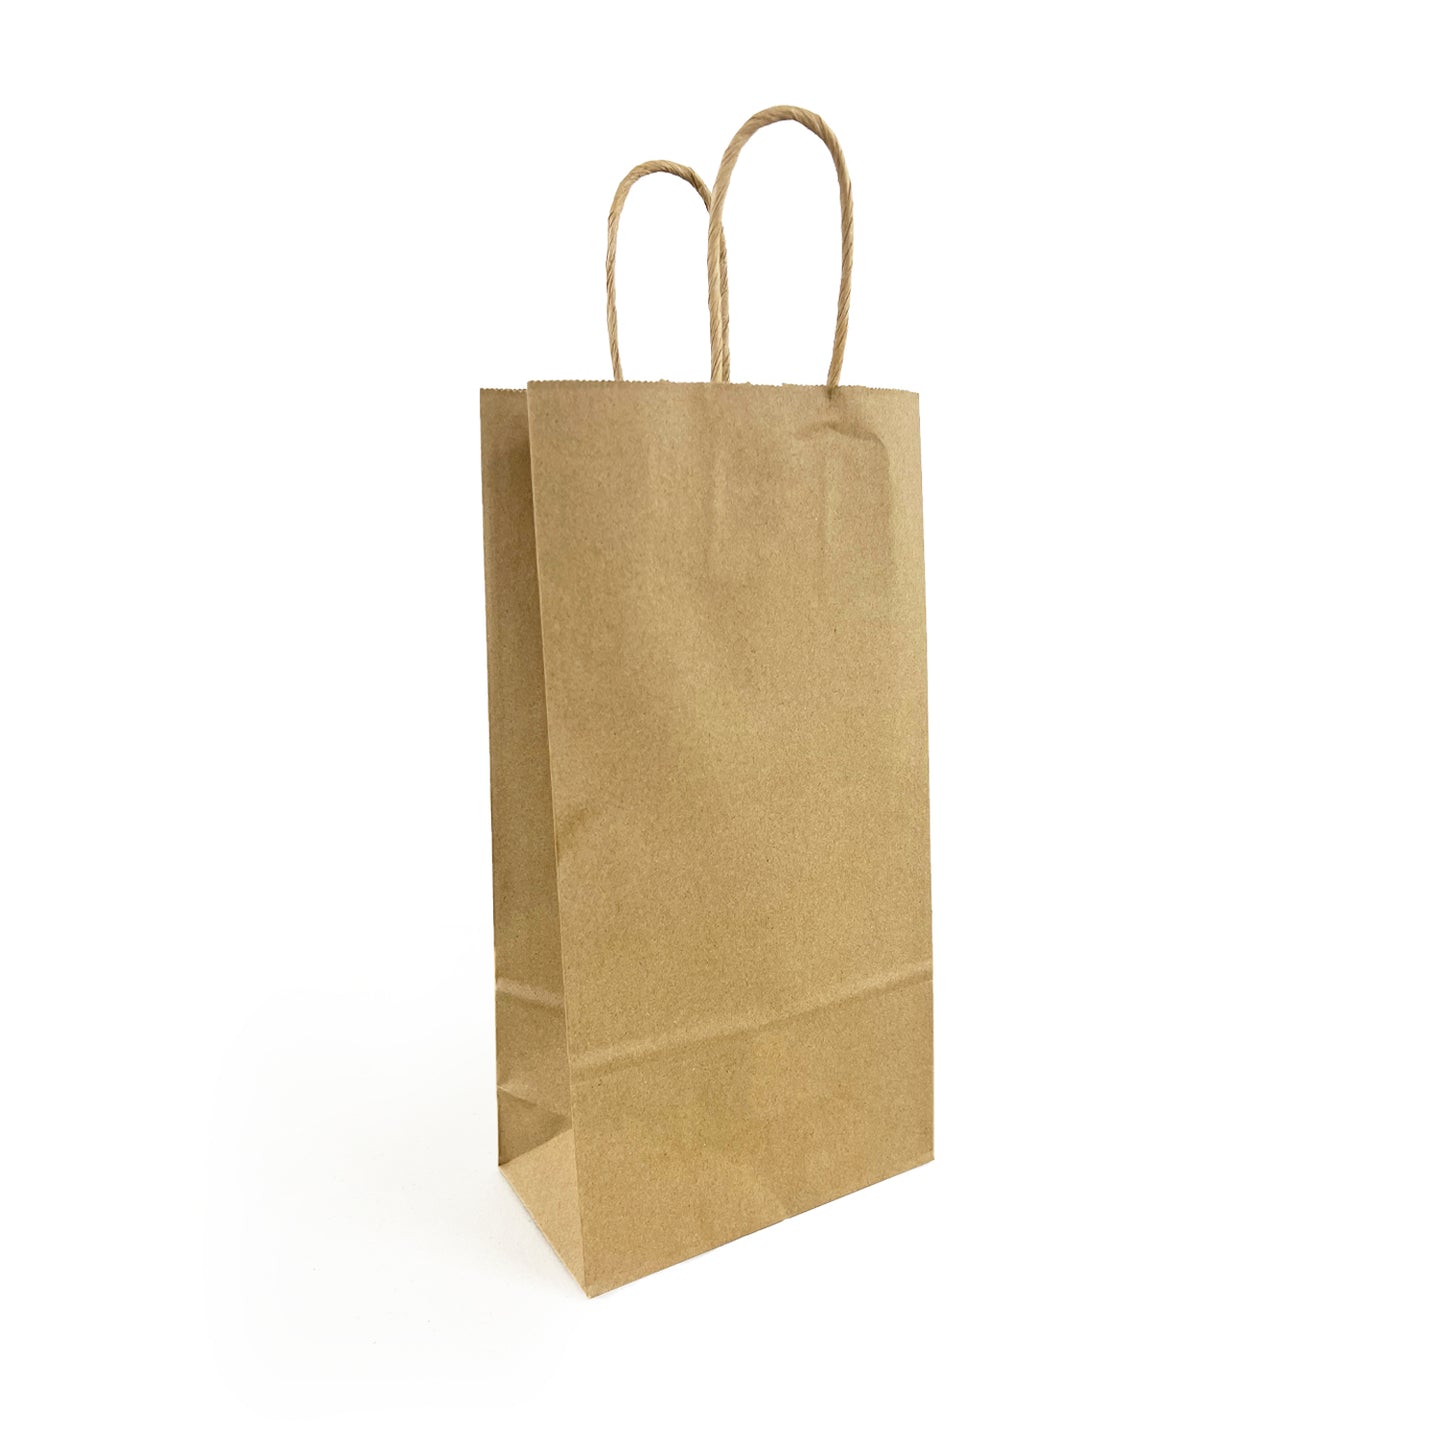 6532B | 250pcs Double Wine 6.5x3.5x12.375 inches Kraft Paper Bags Twisted Handles; $0.33/pc